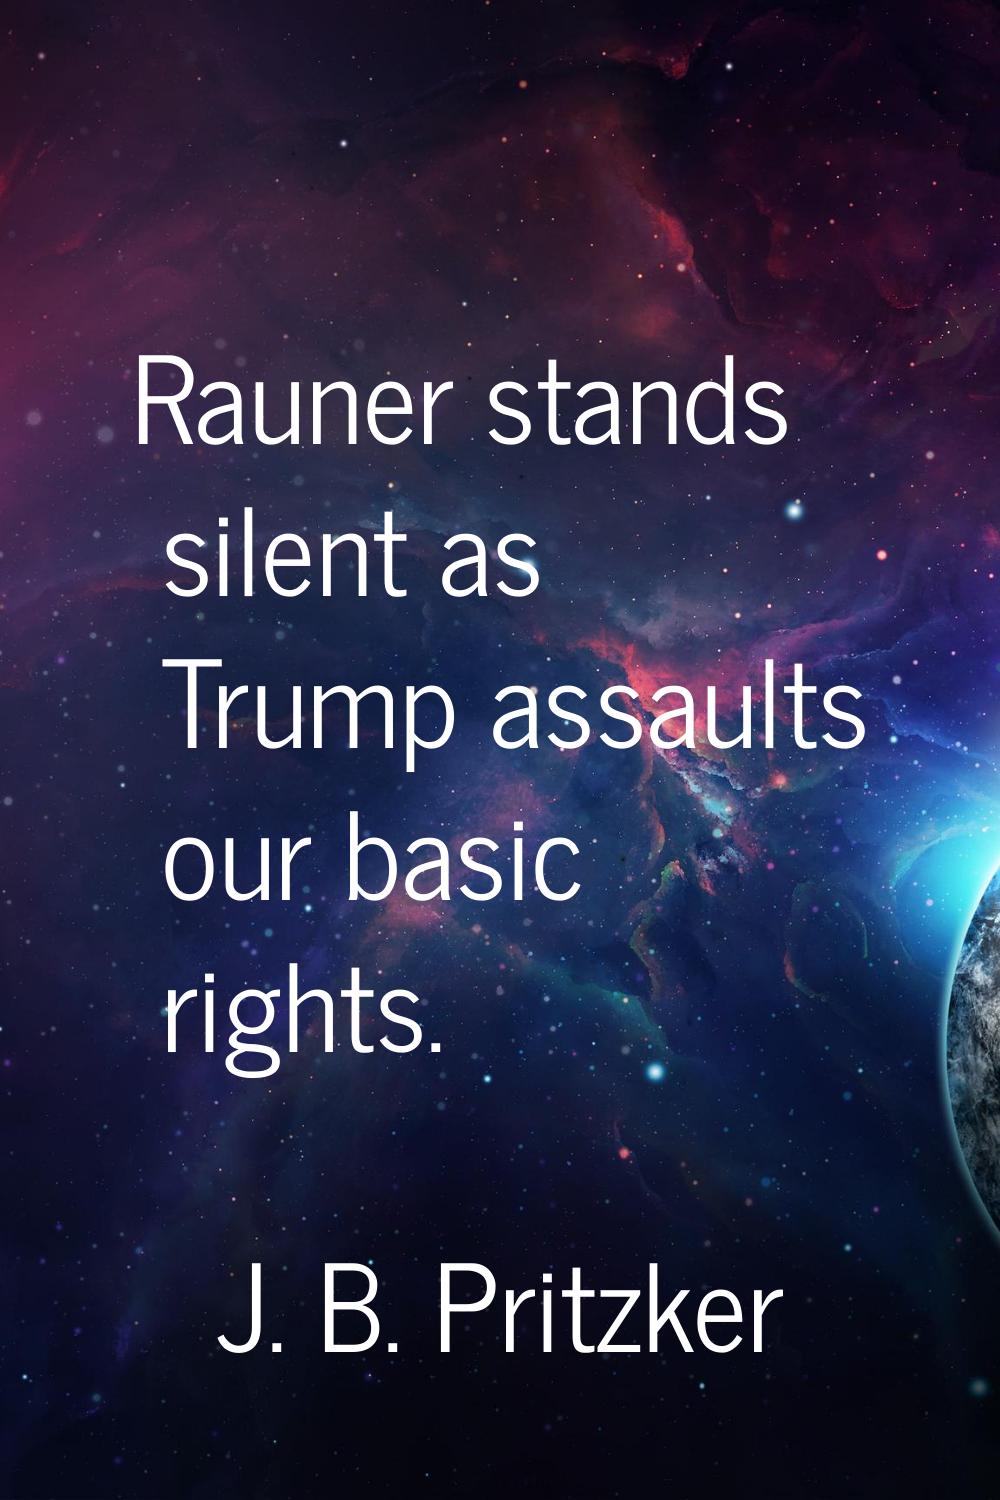 Rauner stands silent as Trump assaults our basic rights.